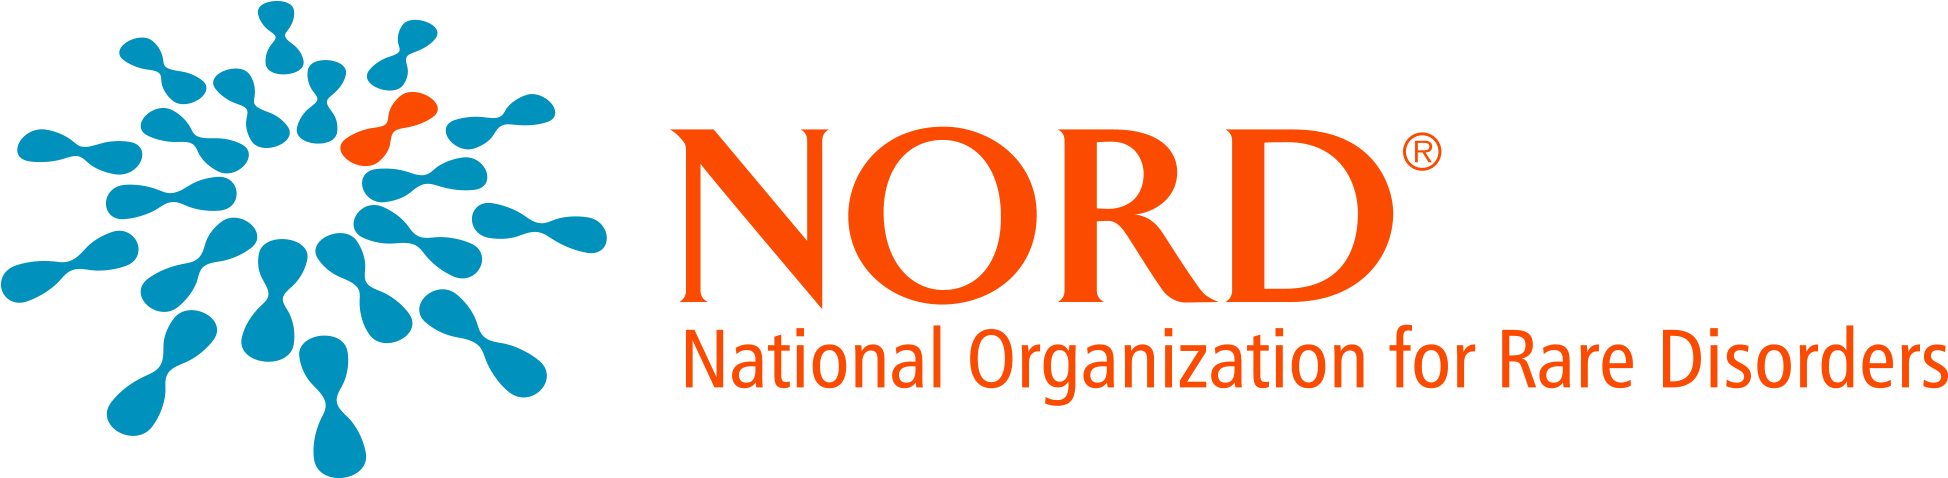 National Organization For Rare Disorders - National Organization For Rare Disorders (2005x561)